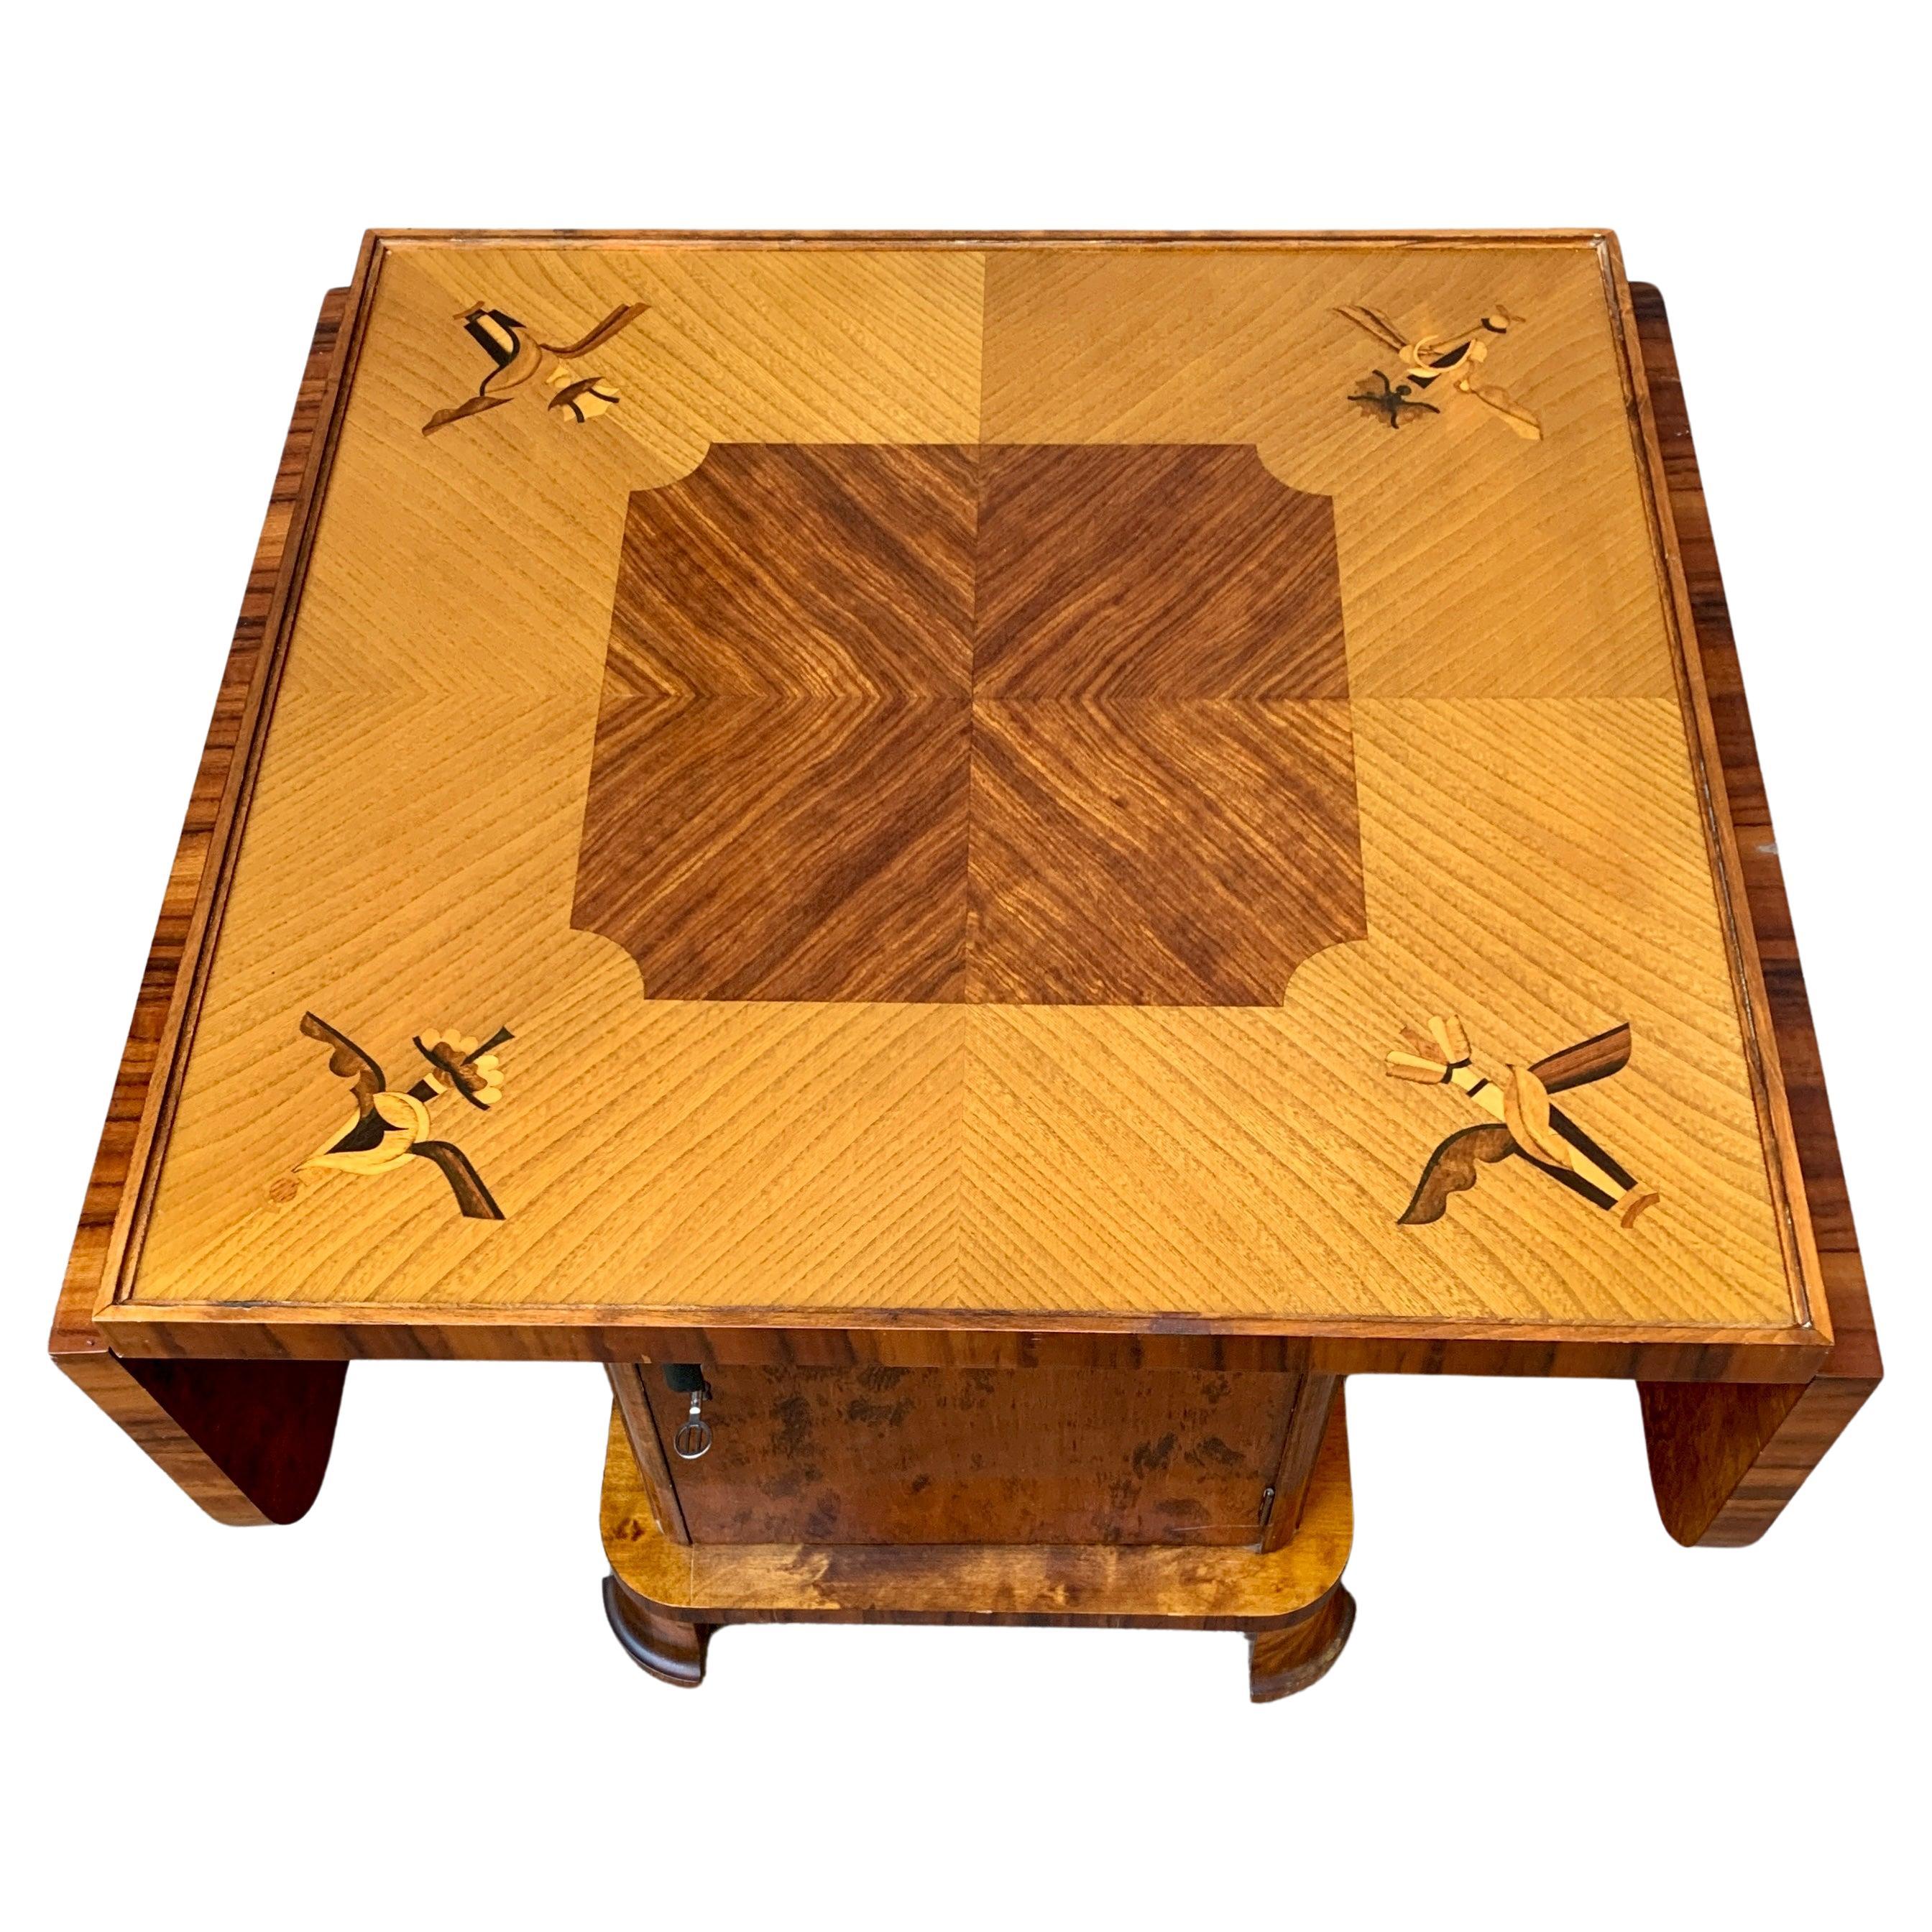 Mid-20th Century Swedish Art Deco Birch and Marquetry Inlay Cocktail Table For Sale